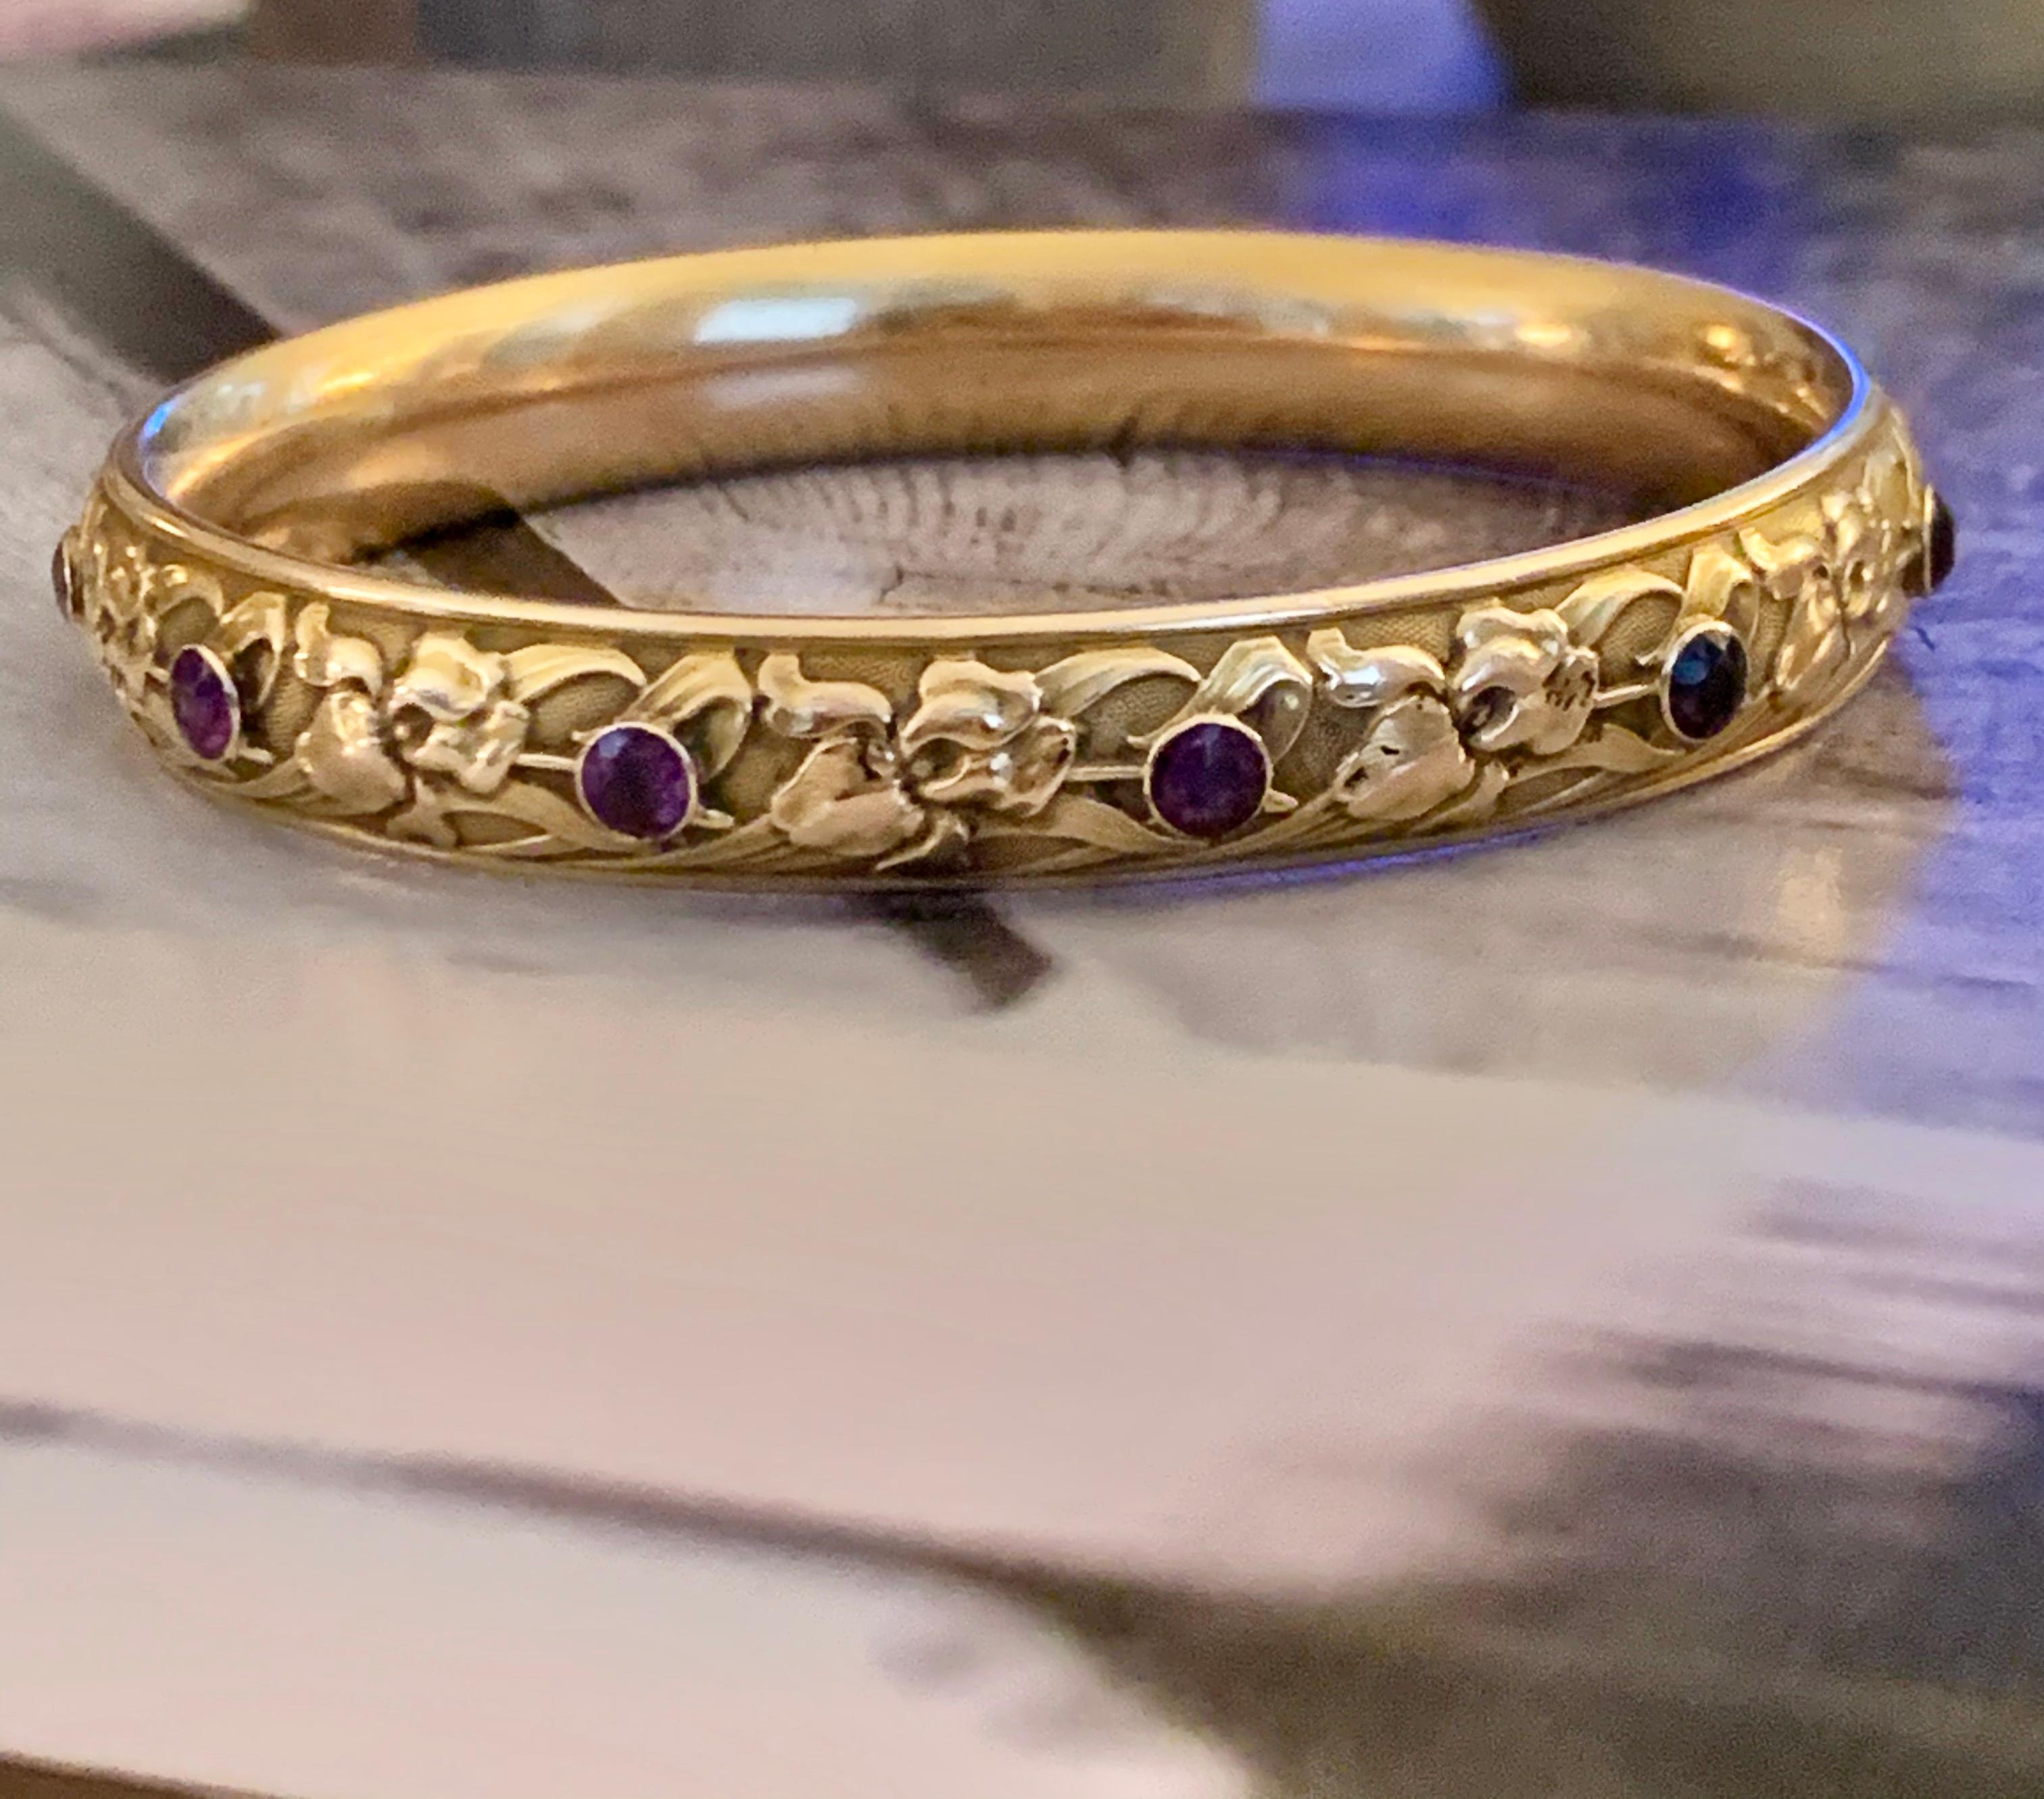 This stunning Krementz signed bangle features 10 Amethyst bezel set all the way around the circumference of this piece.  
Krementz pieces are sought after and this piece is in lovely condition, especially given its age.

Measurements:
Outside: 8